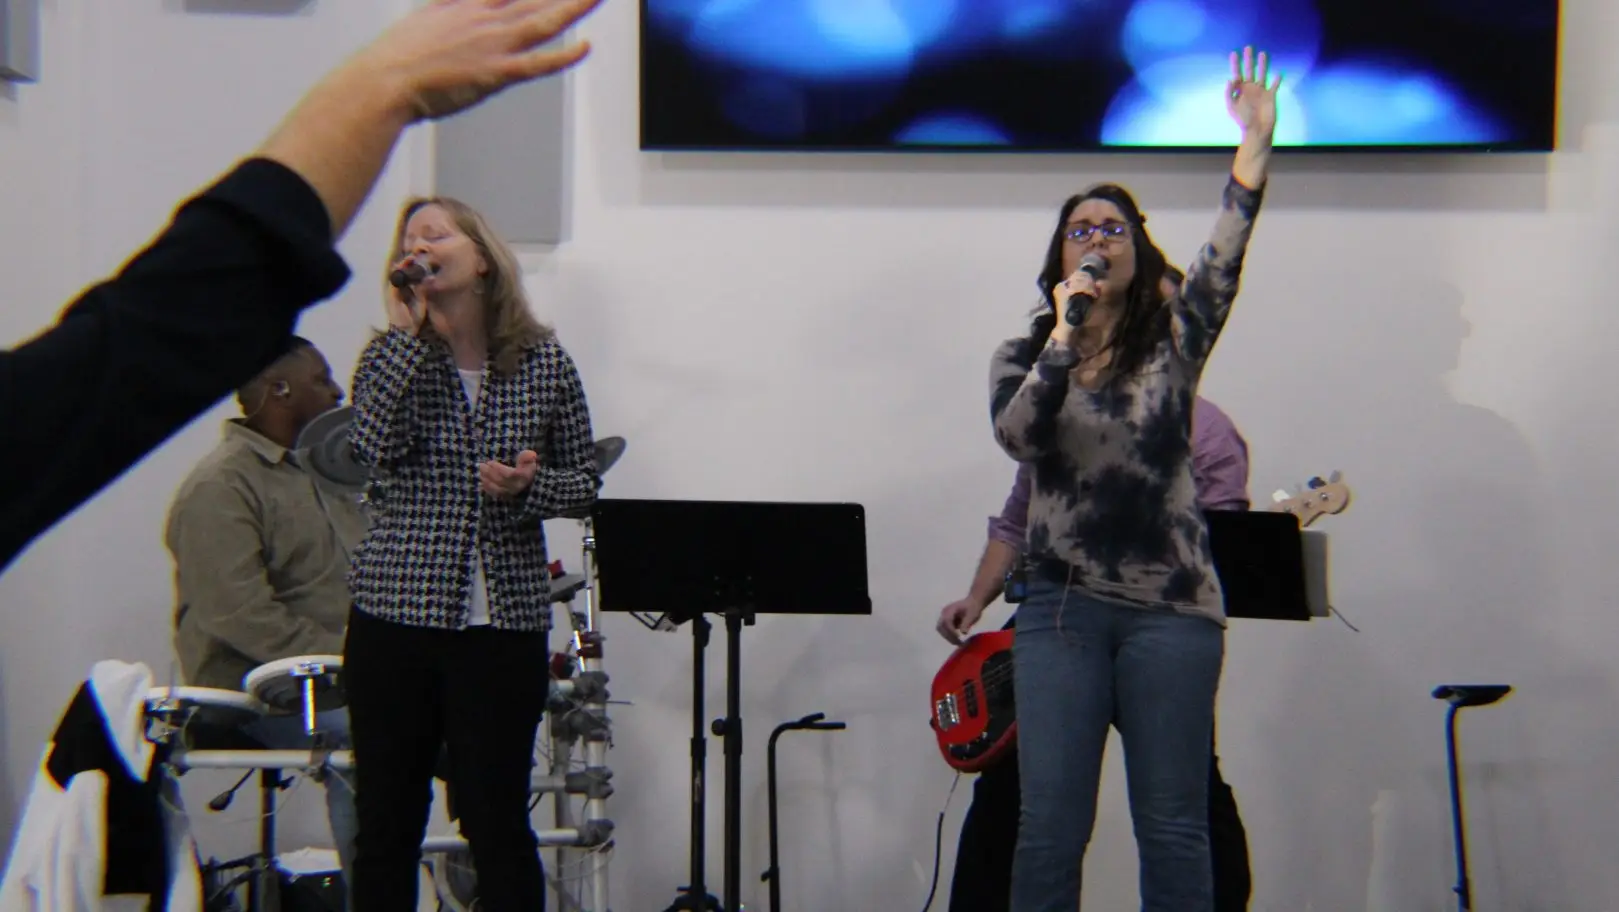 Two women singing with passion about Jesus